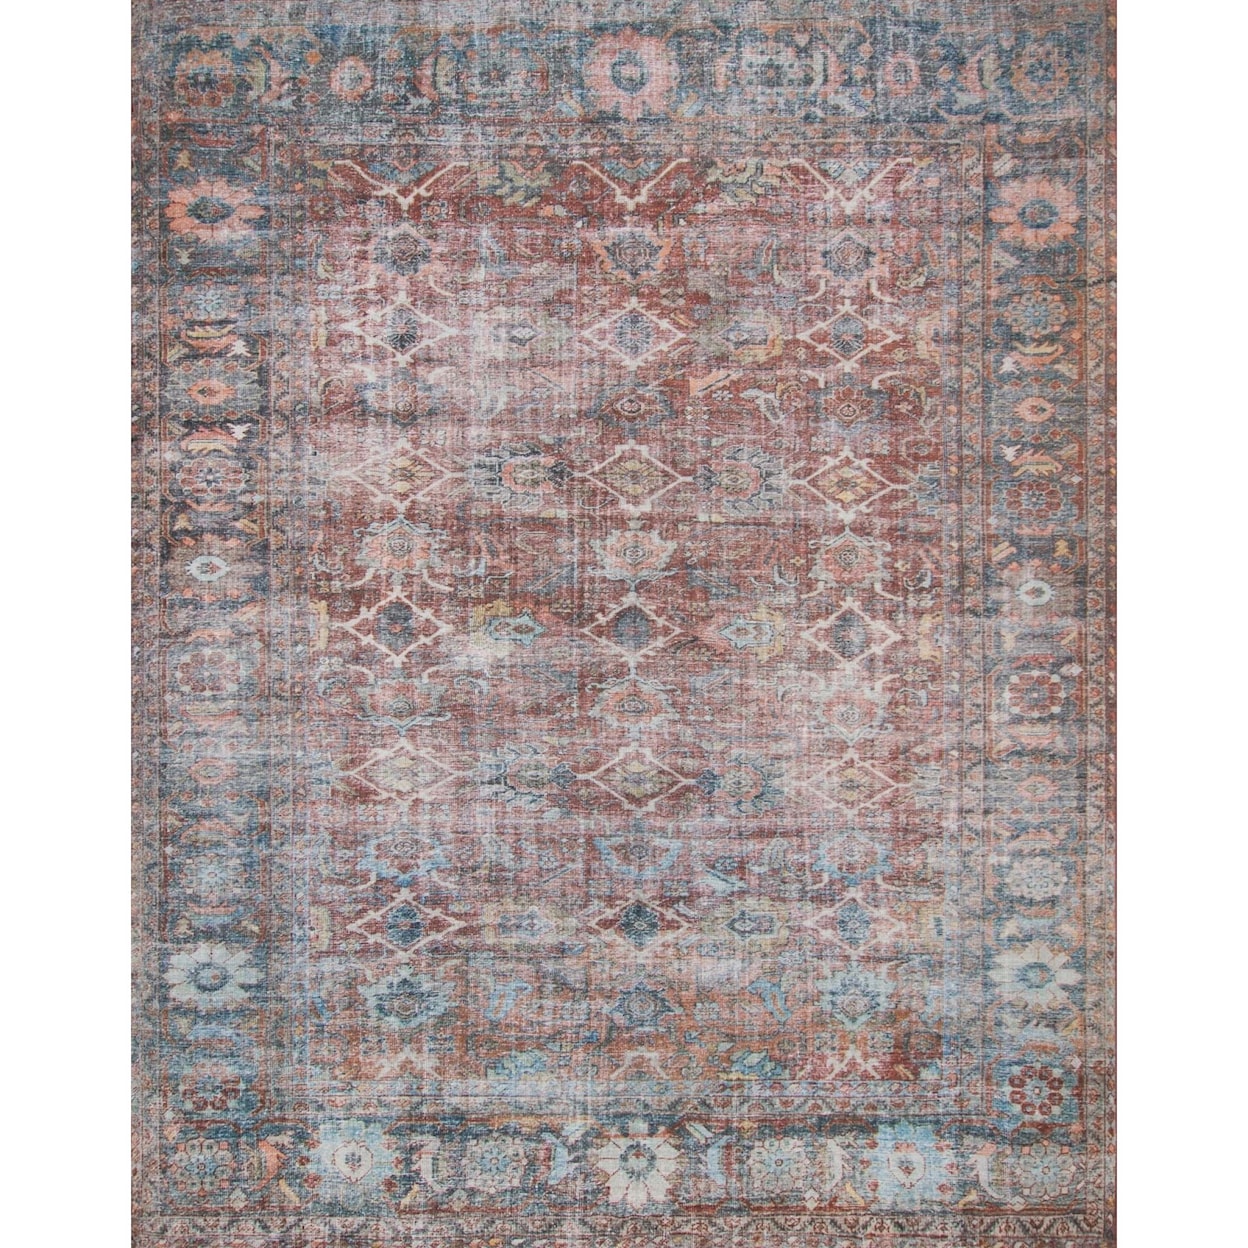 Magnolia Home by Joanna Gaines for Loloi Lucca 7'-6" x 9'-6" Rug